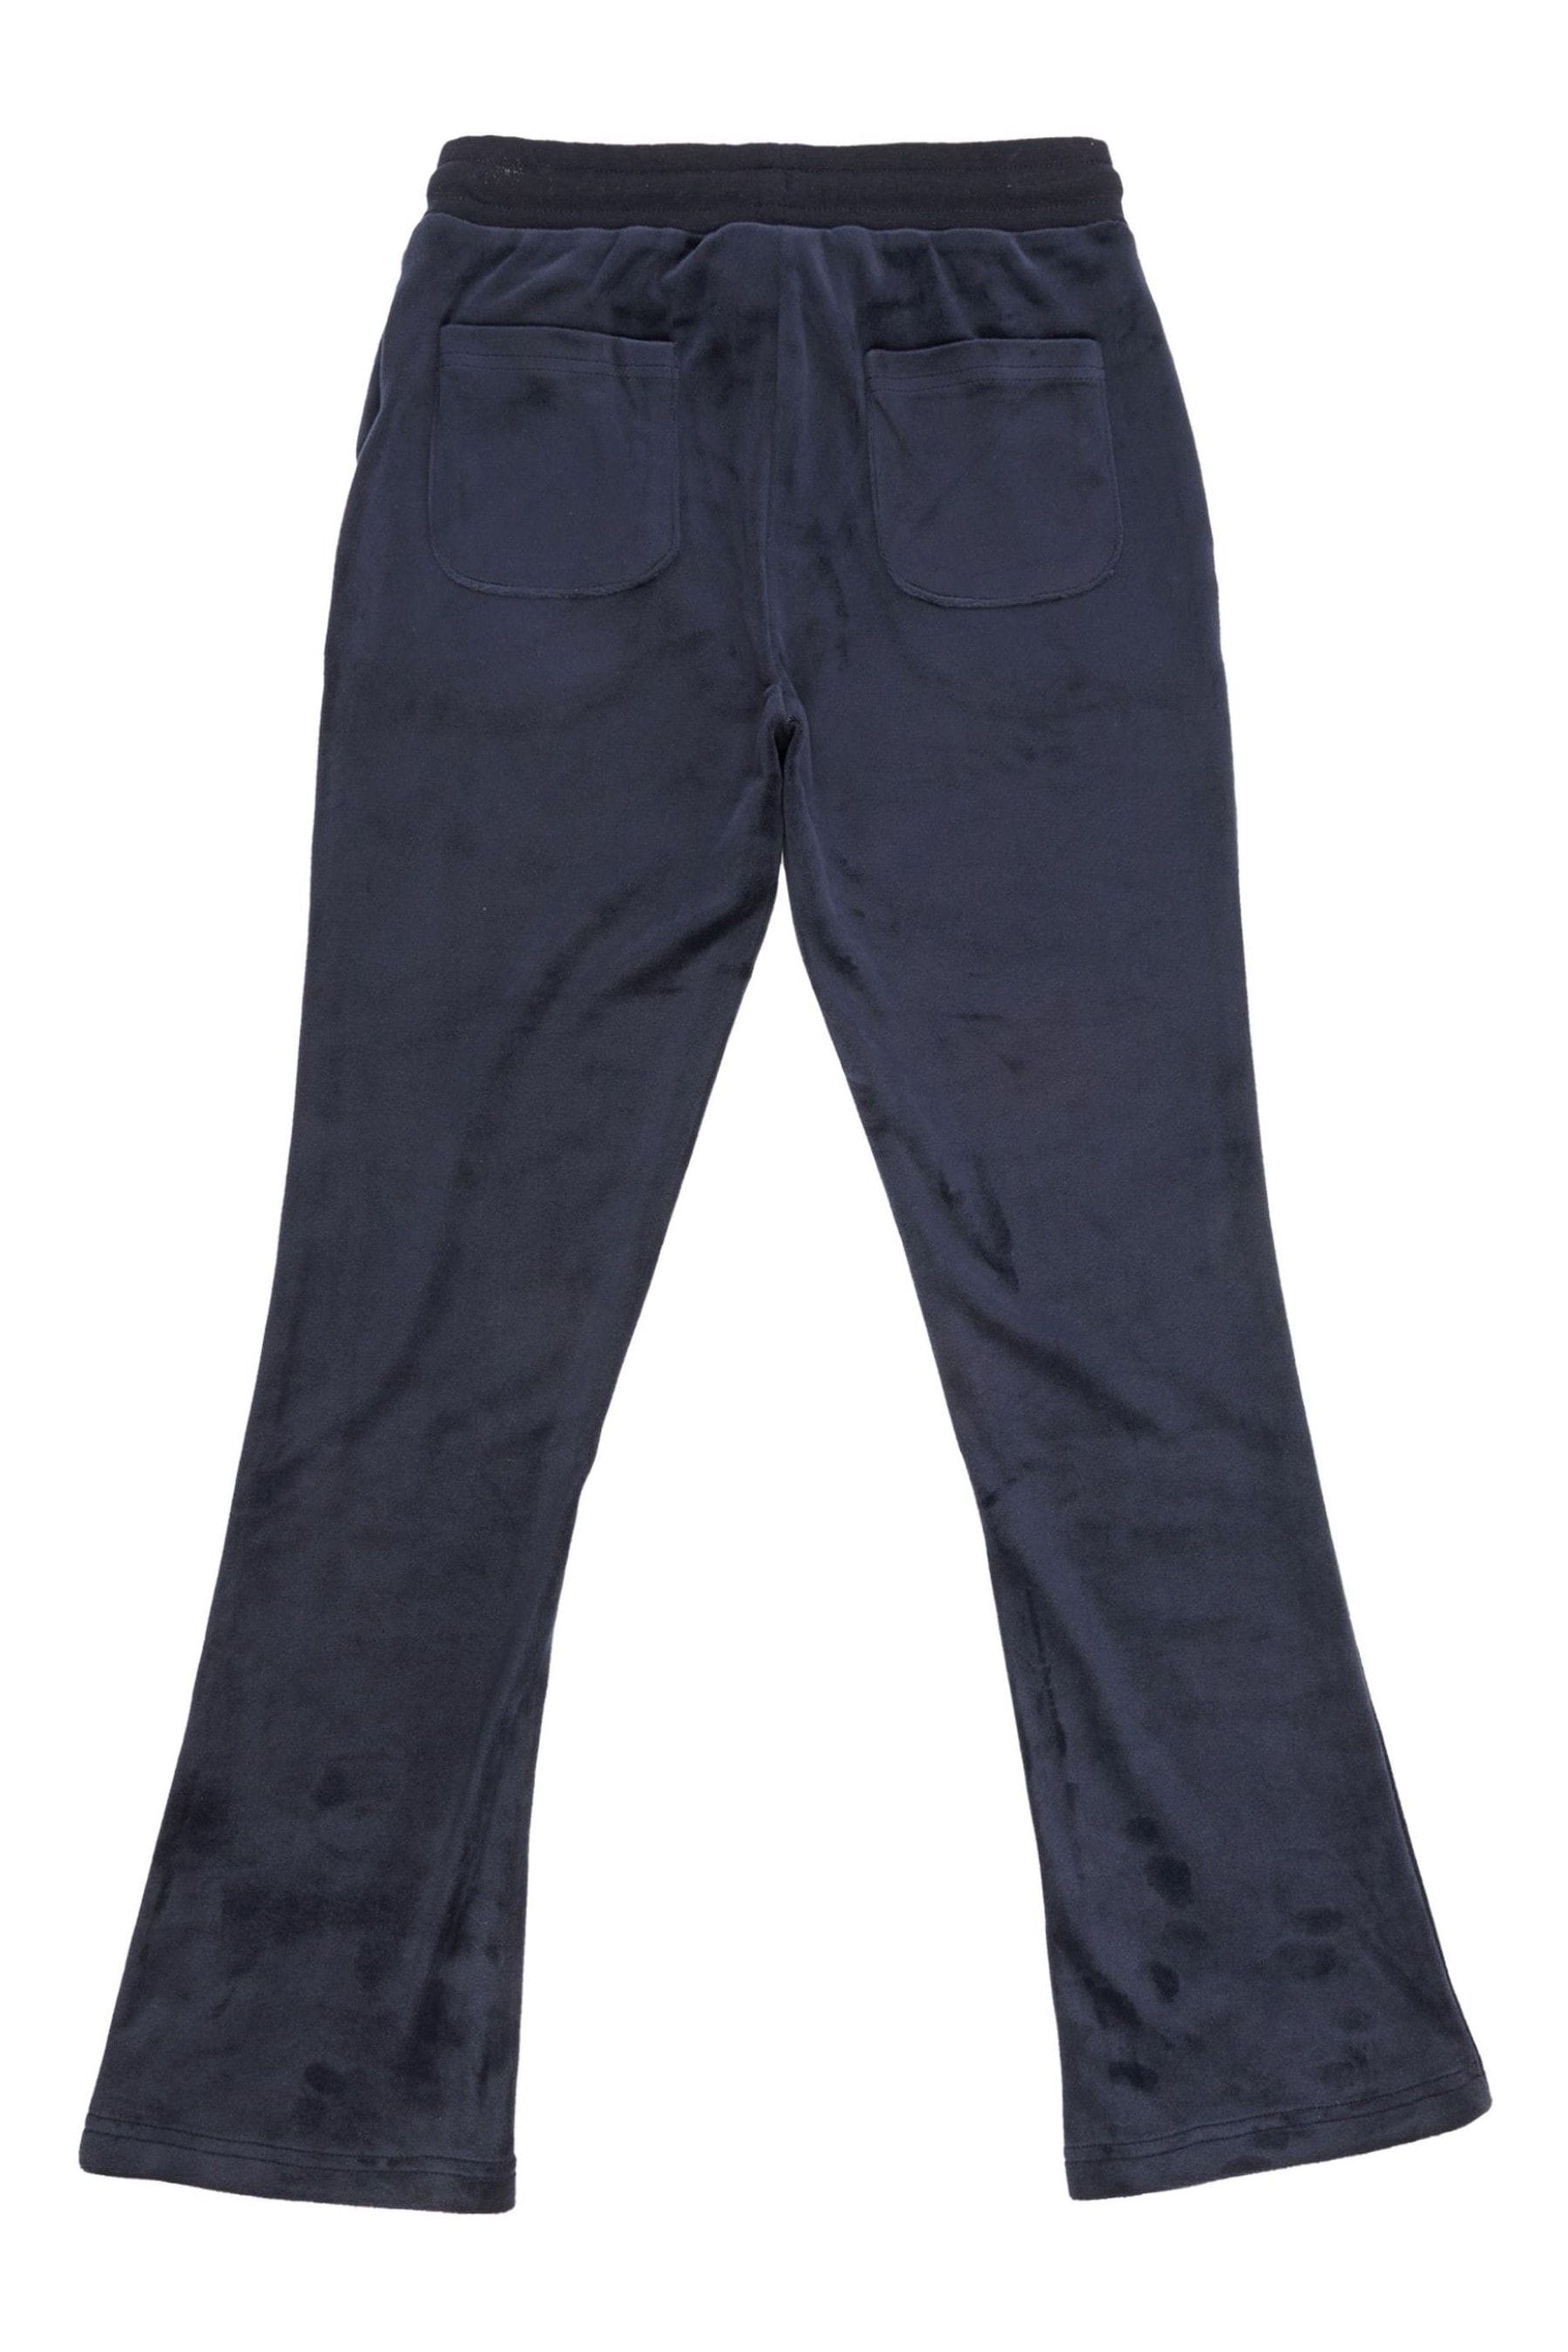 Buy Juicy Couture Diamante Velour Bootcut Joggers from the Next UK ...